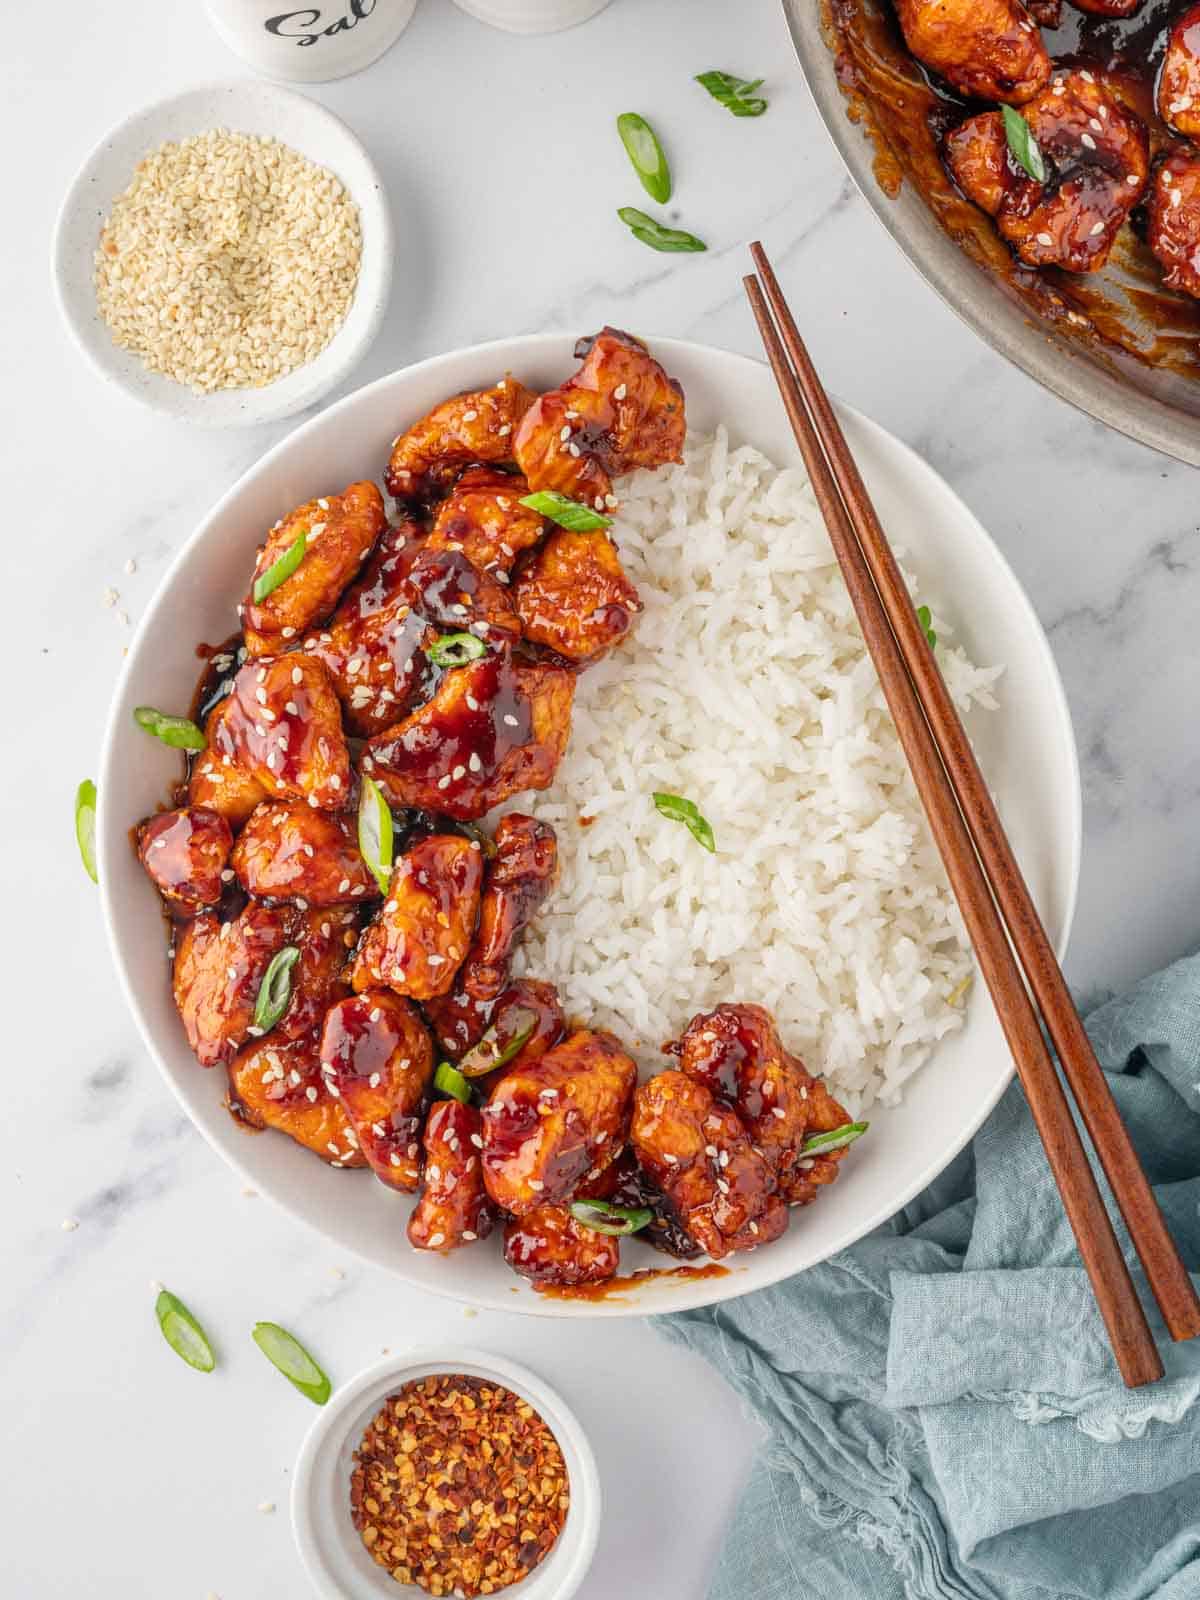 Crispy gochujang chicken bites over a bed of rice with chopsticks.